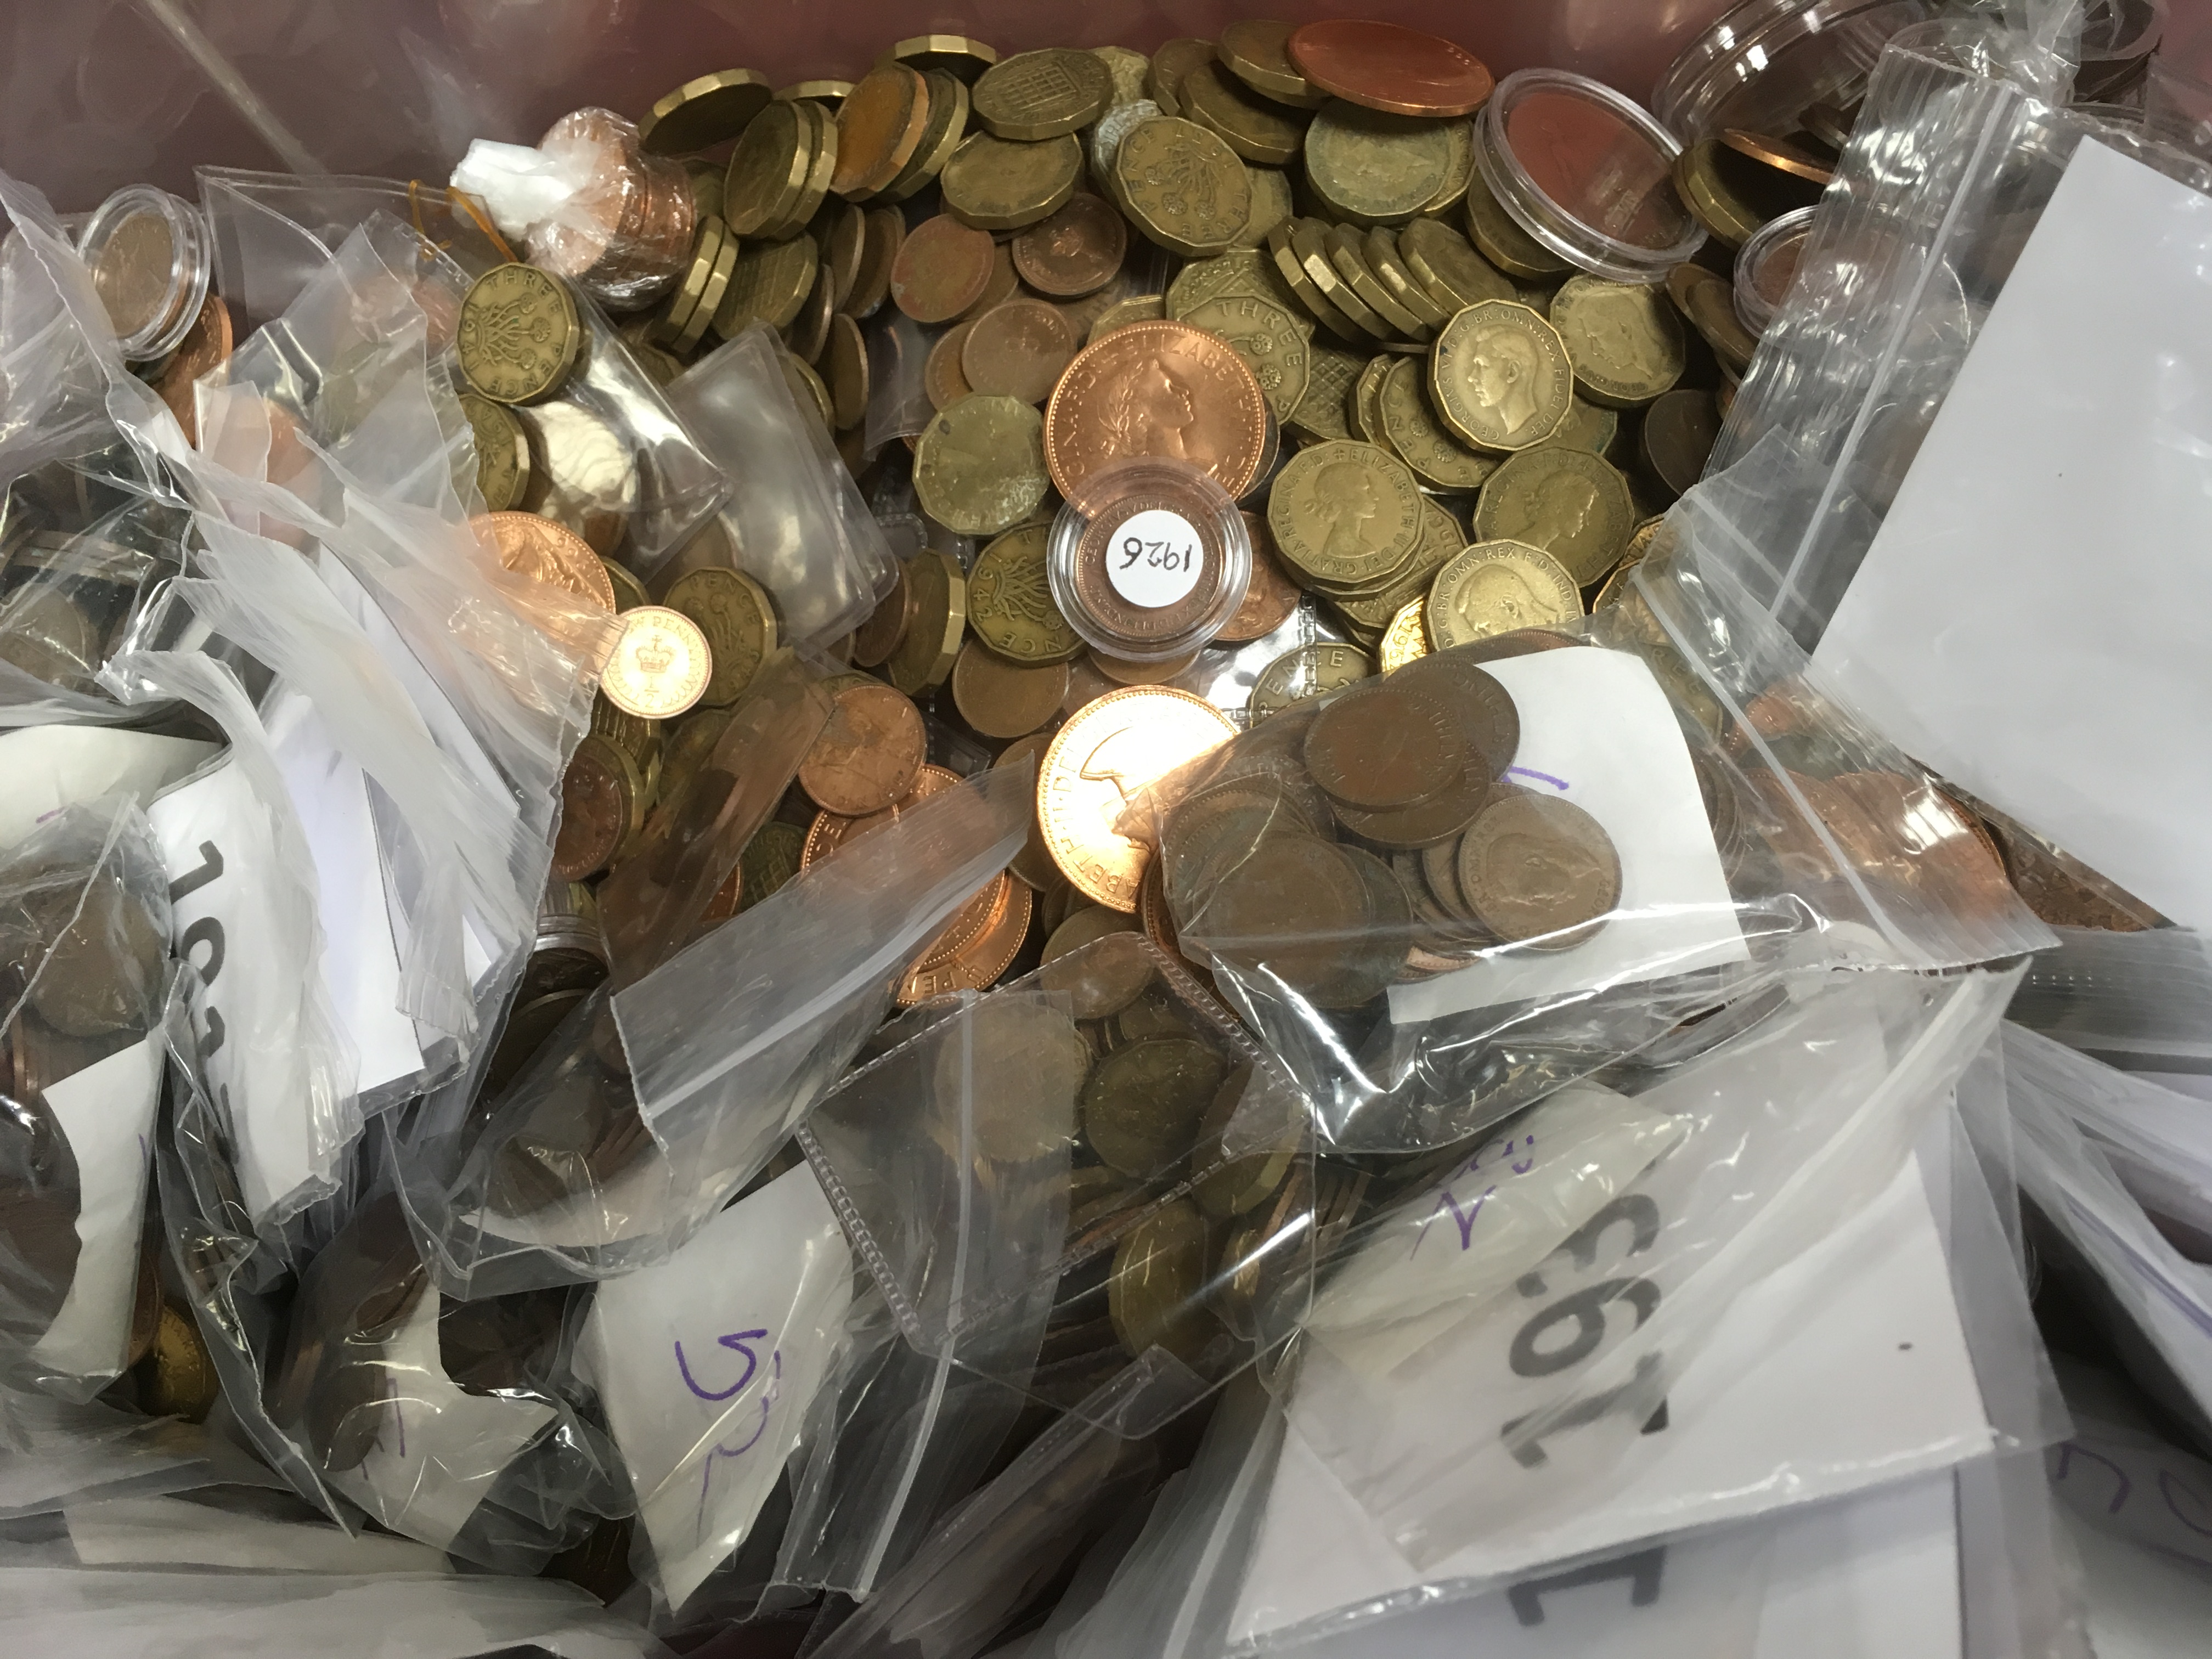 COINS: LARGE TUB WITH A HEAVY ACCUMULATION GB PENNIES, HALFPENNIES, FARTHINGS, BRASS THREEPENCES, - Image 2 of 2